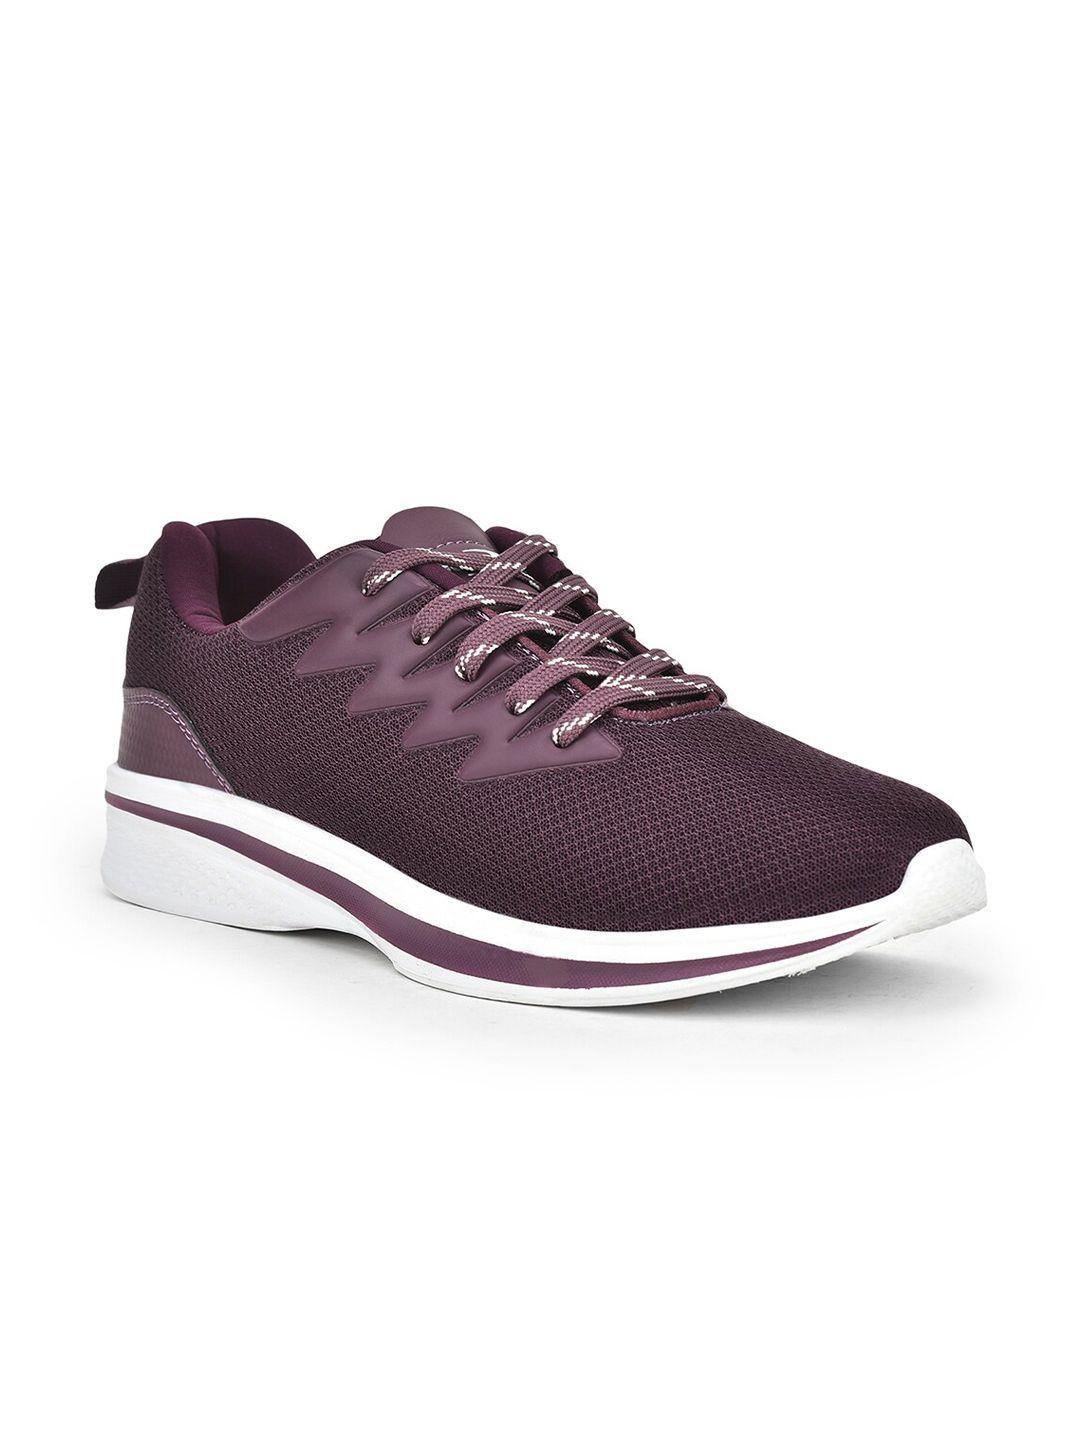 liberty women lace-up running shoes